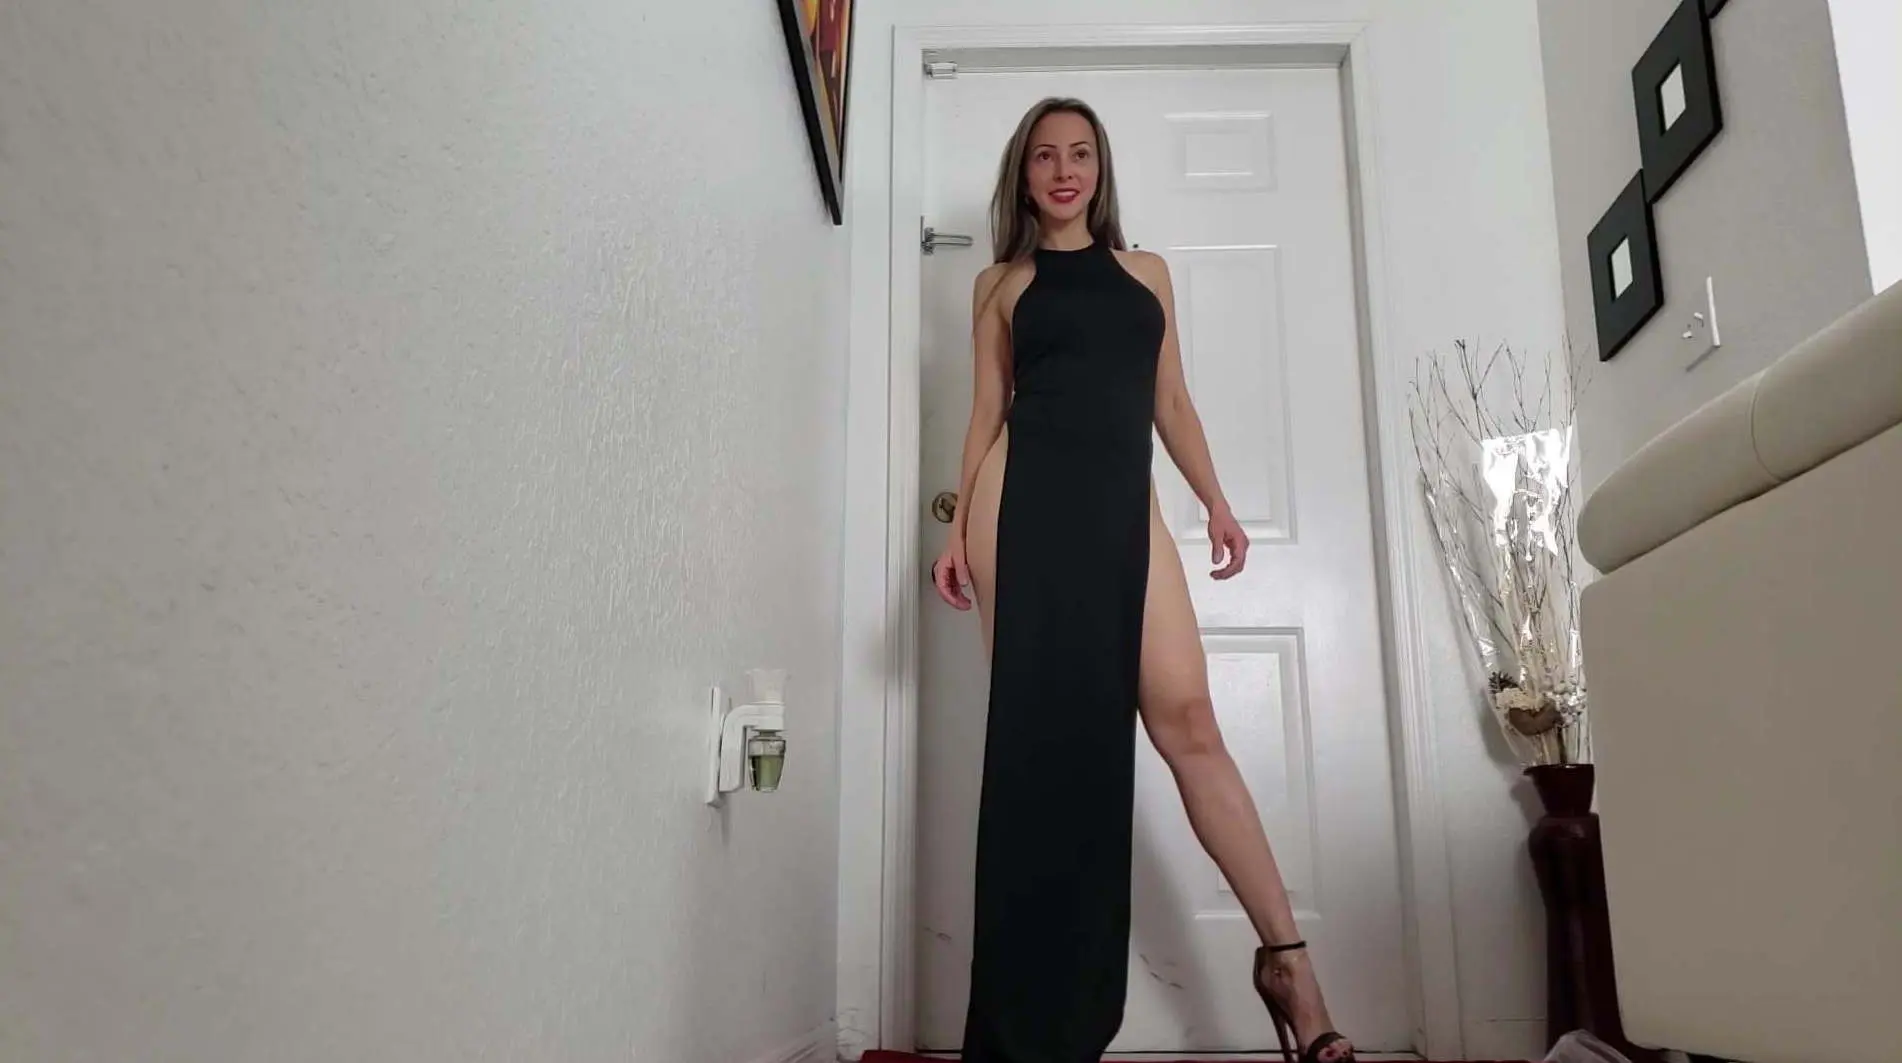 Posing in black high heels and long dress with high slit legs